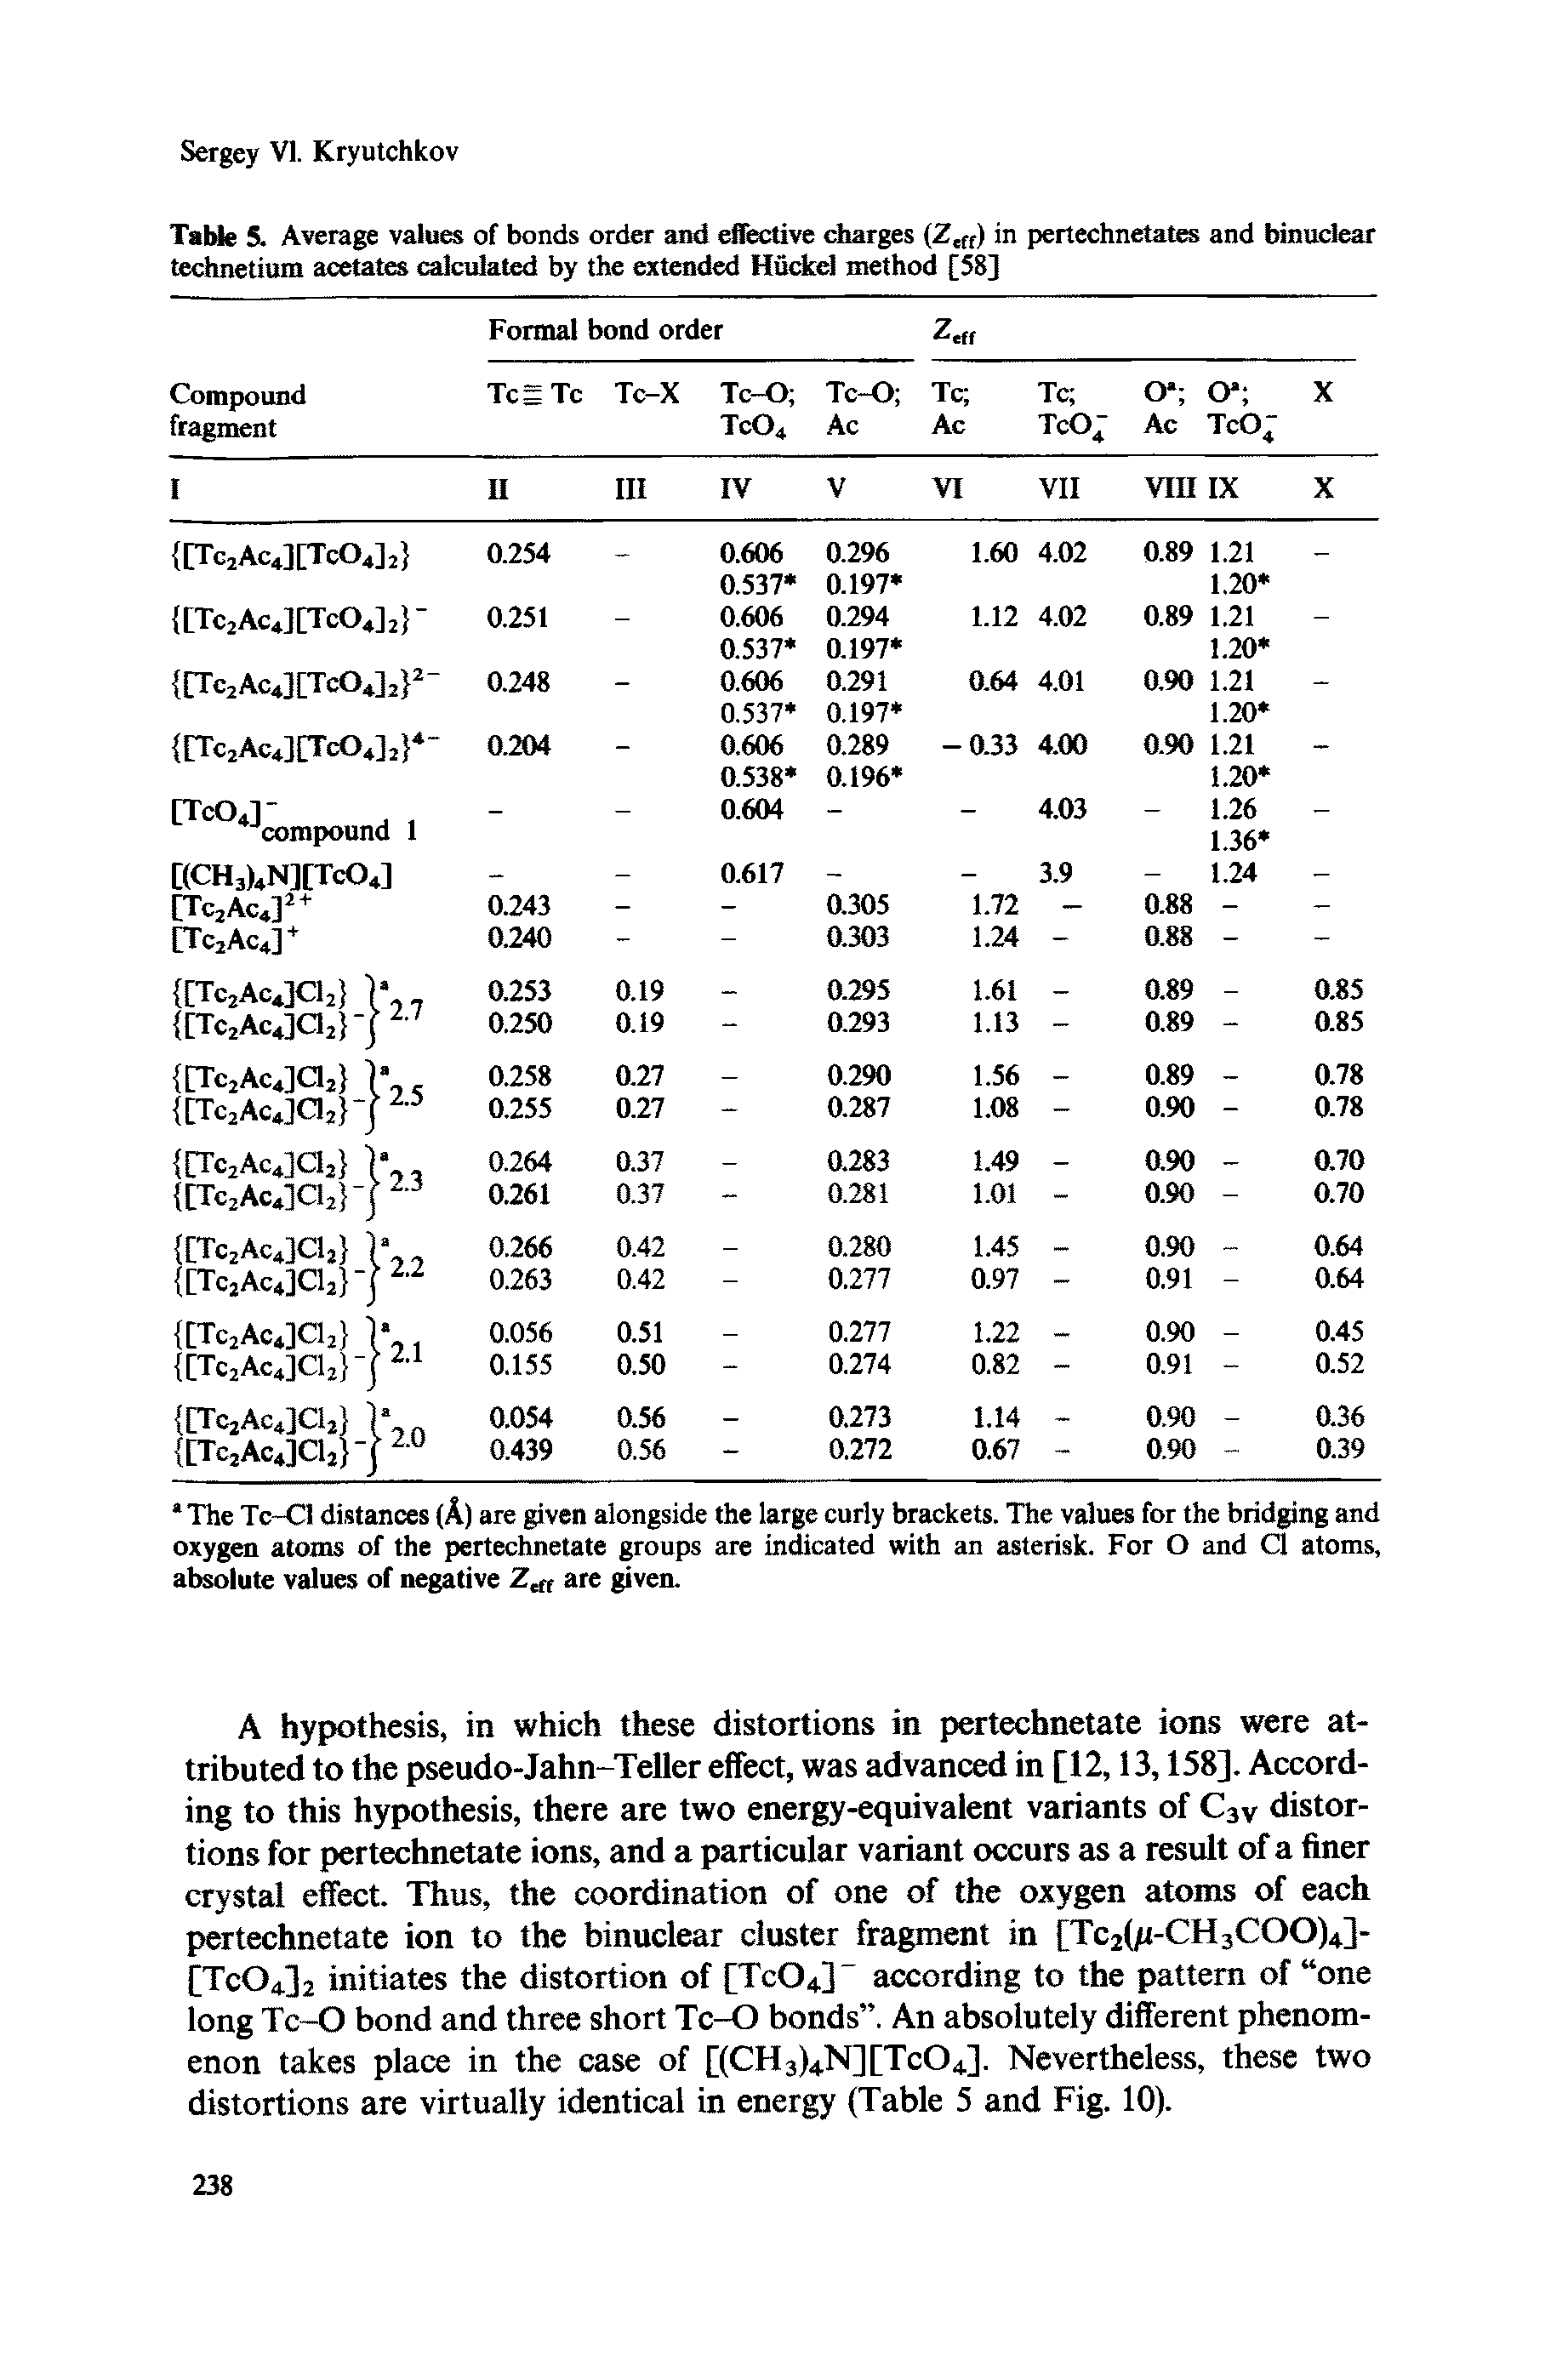 Table 5. Average values of bonds order and effective charges (Zeff) in pertechnetates and binuclear technetium acetates calculated by the extended Huckel method [58]...